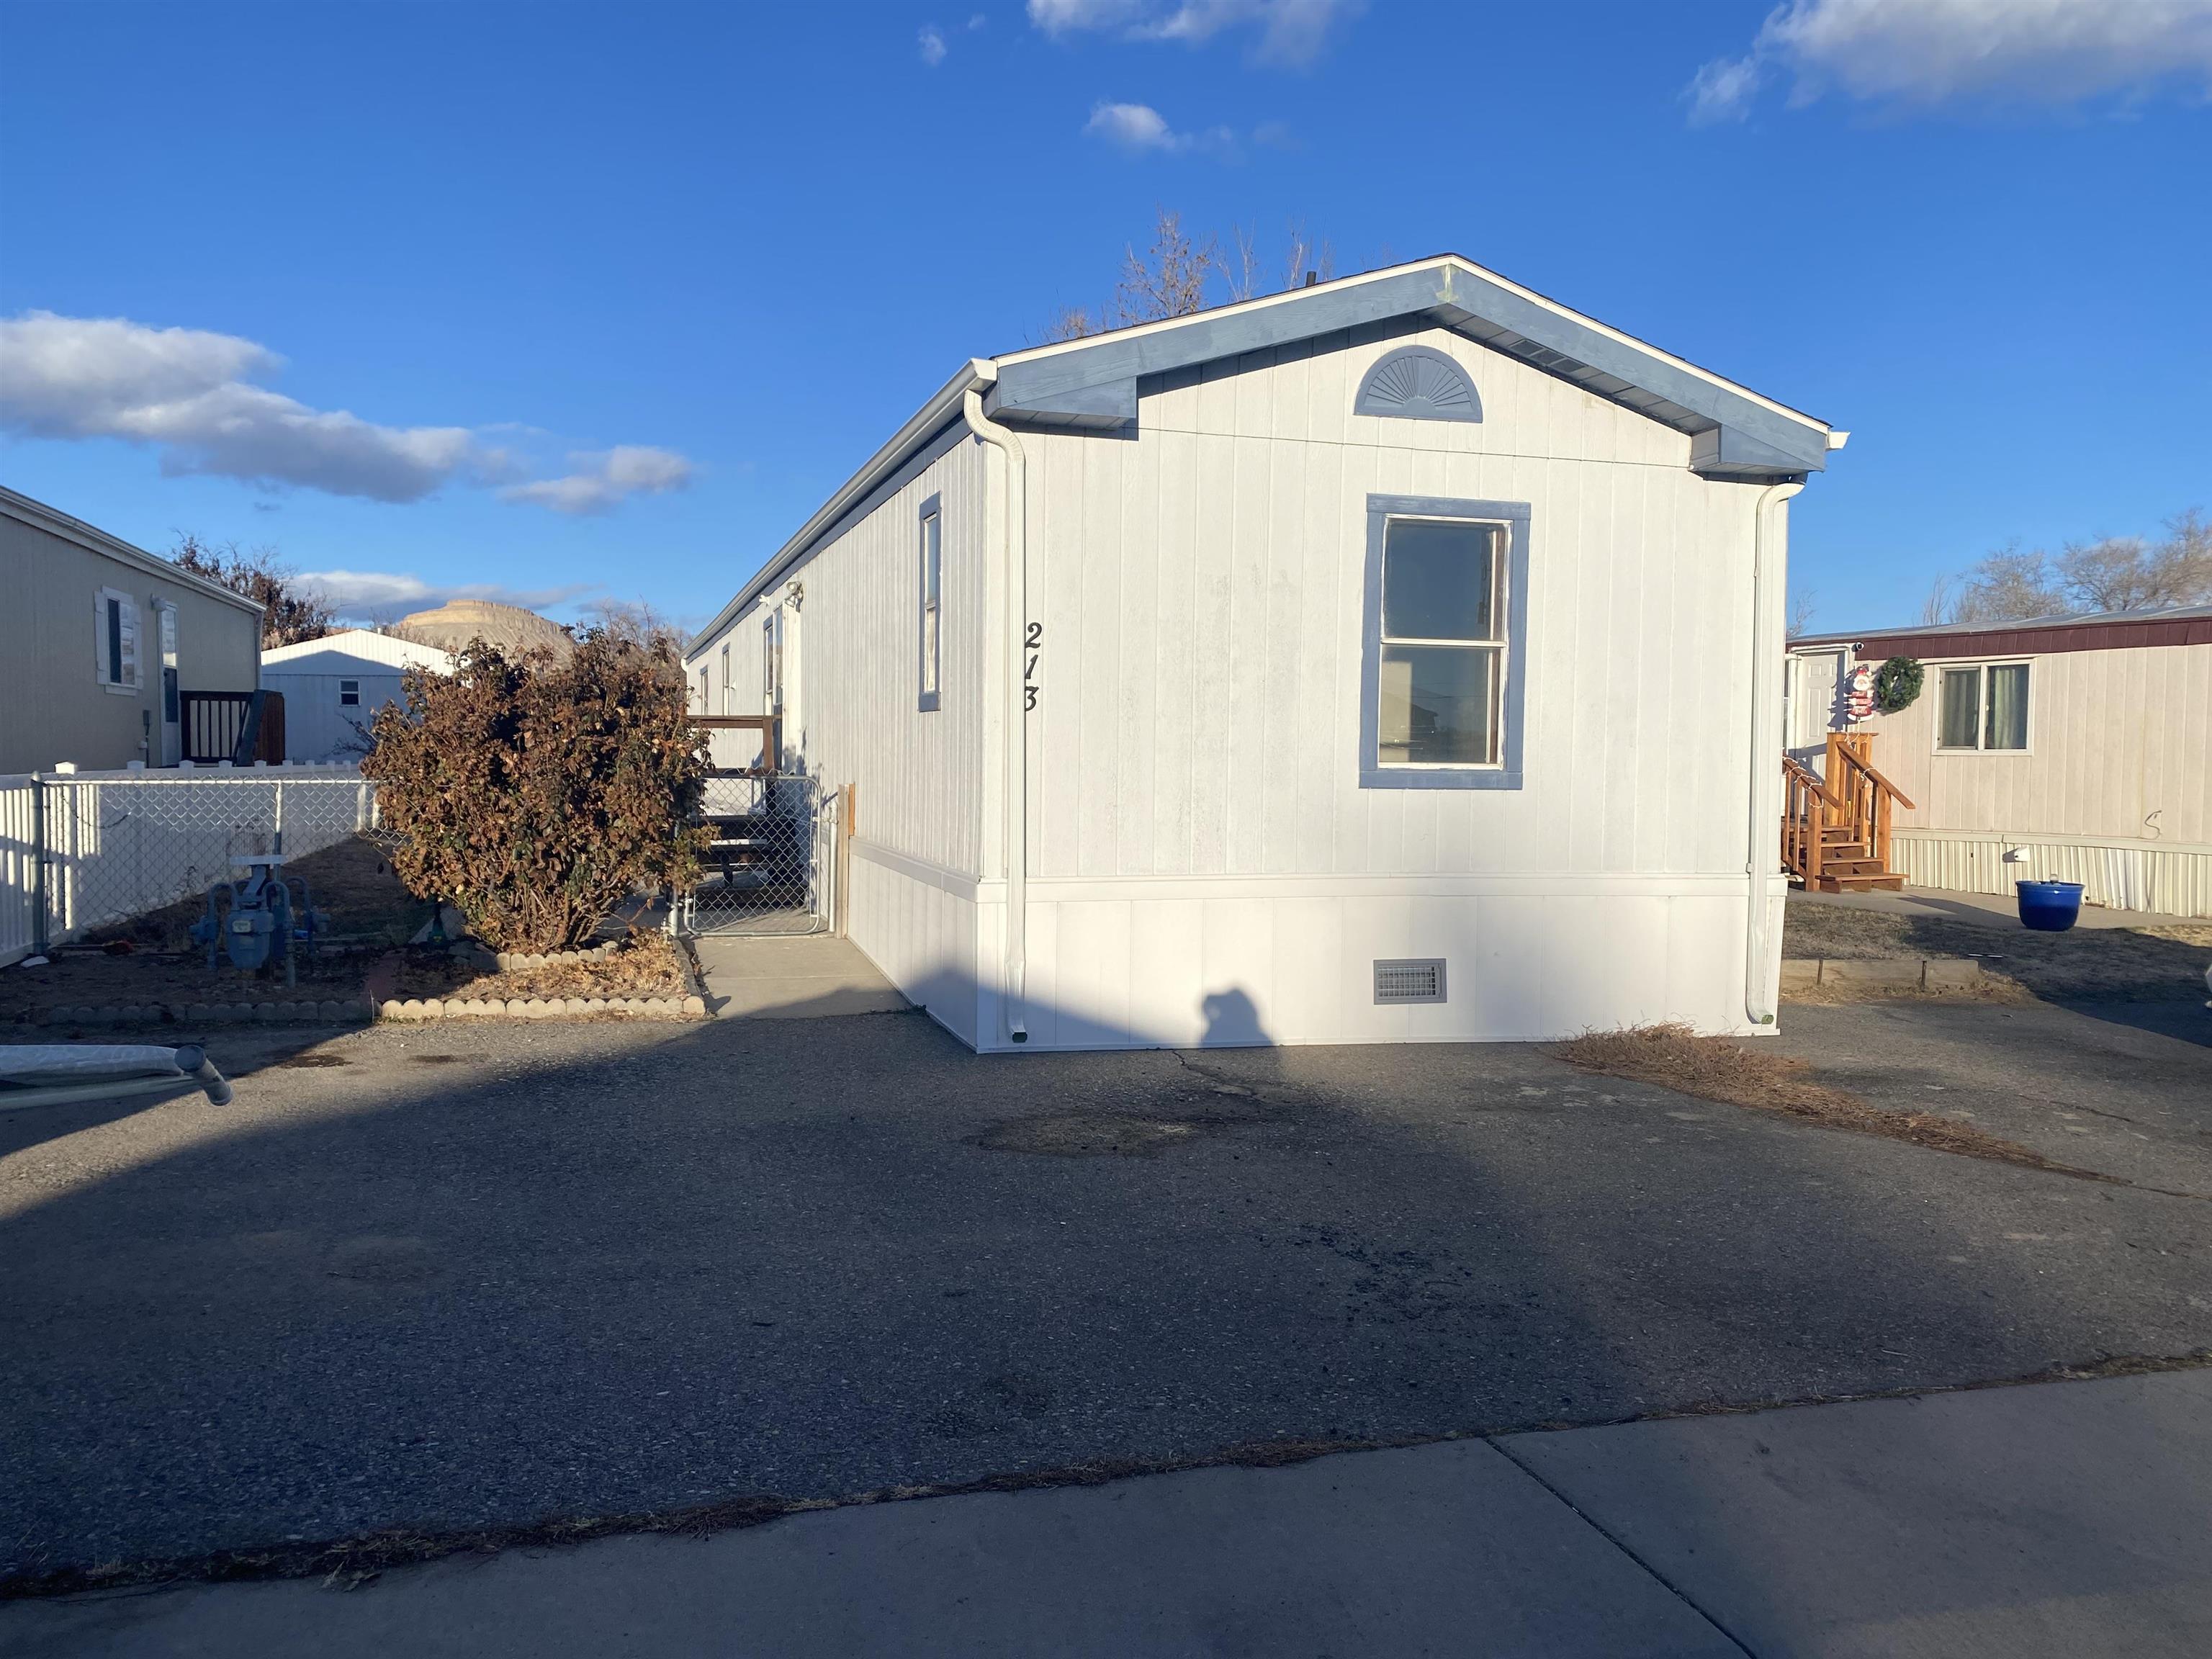 424 32 Road 213, Clifton, CO 81520